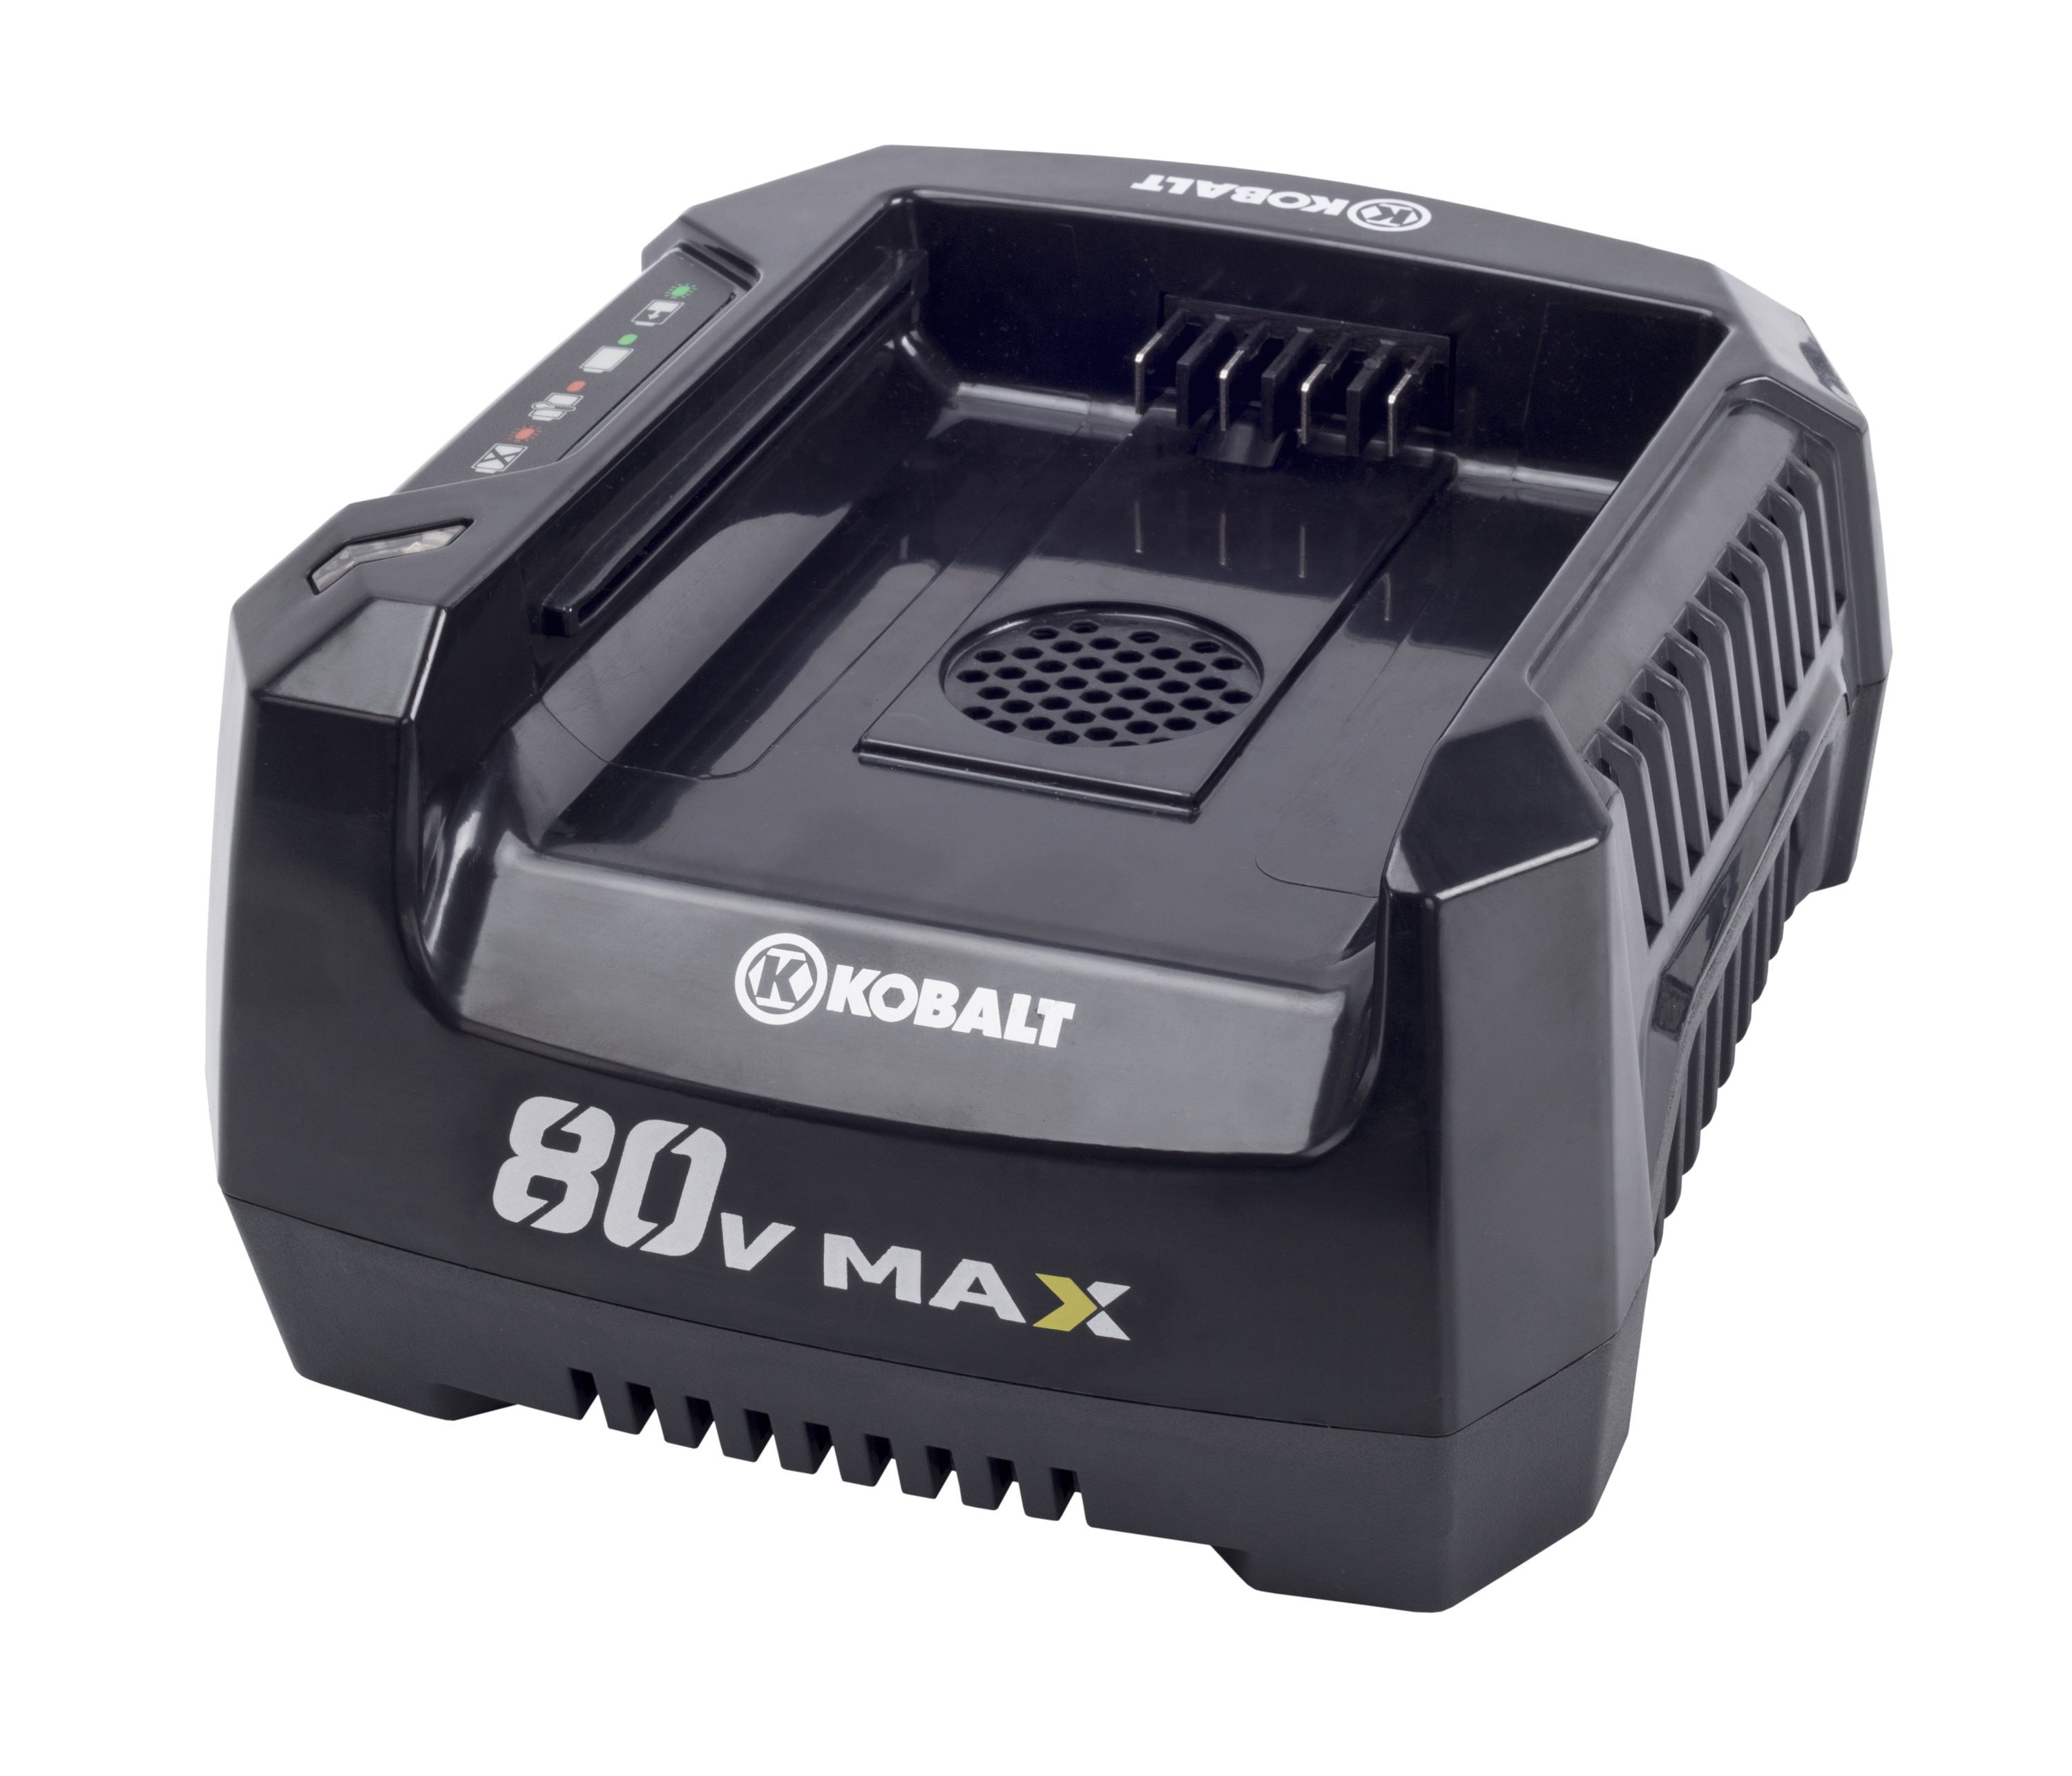 Kobalt 80 Volt Max Volt Lithium Ion Li Ion Charger In The Cordless